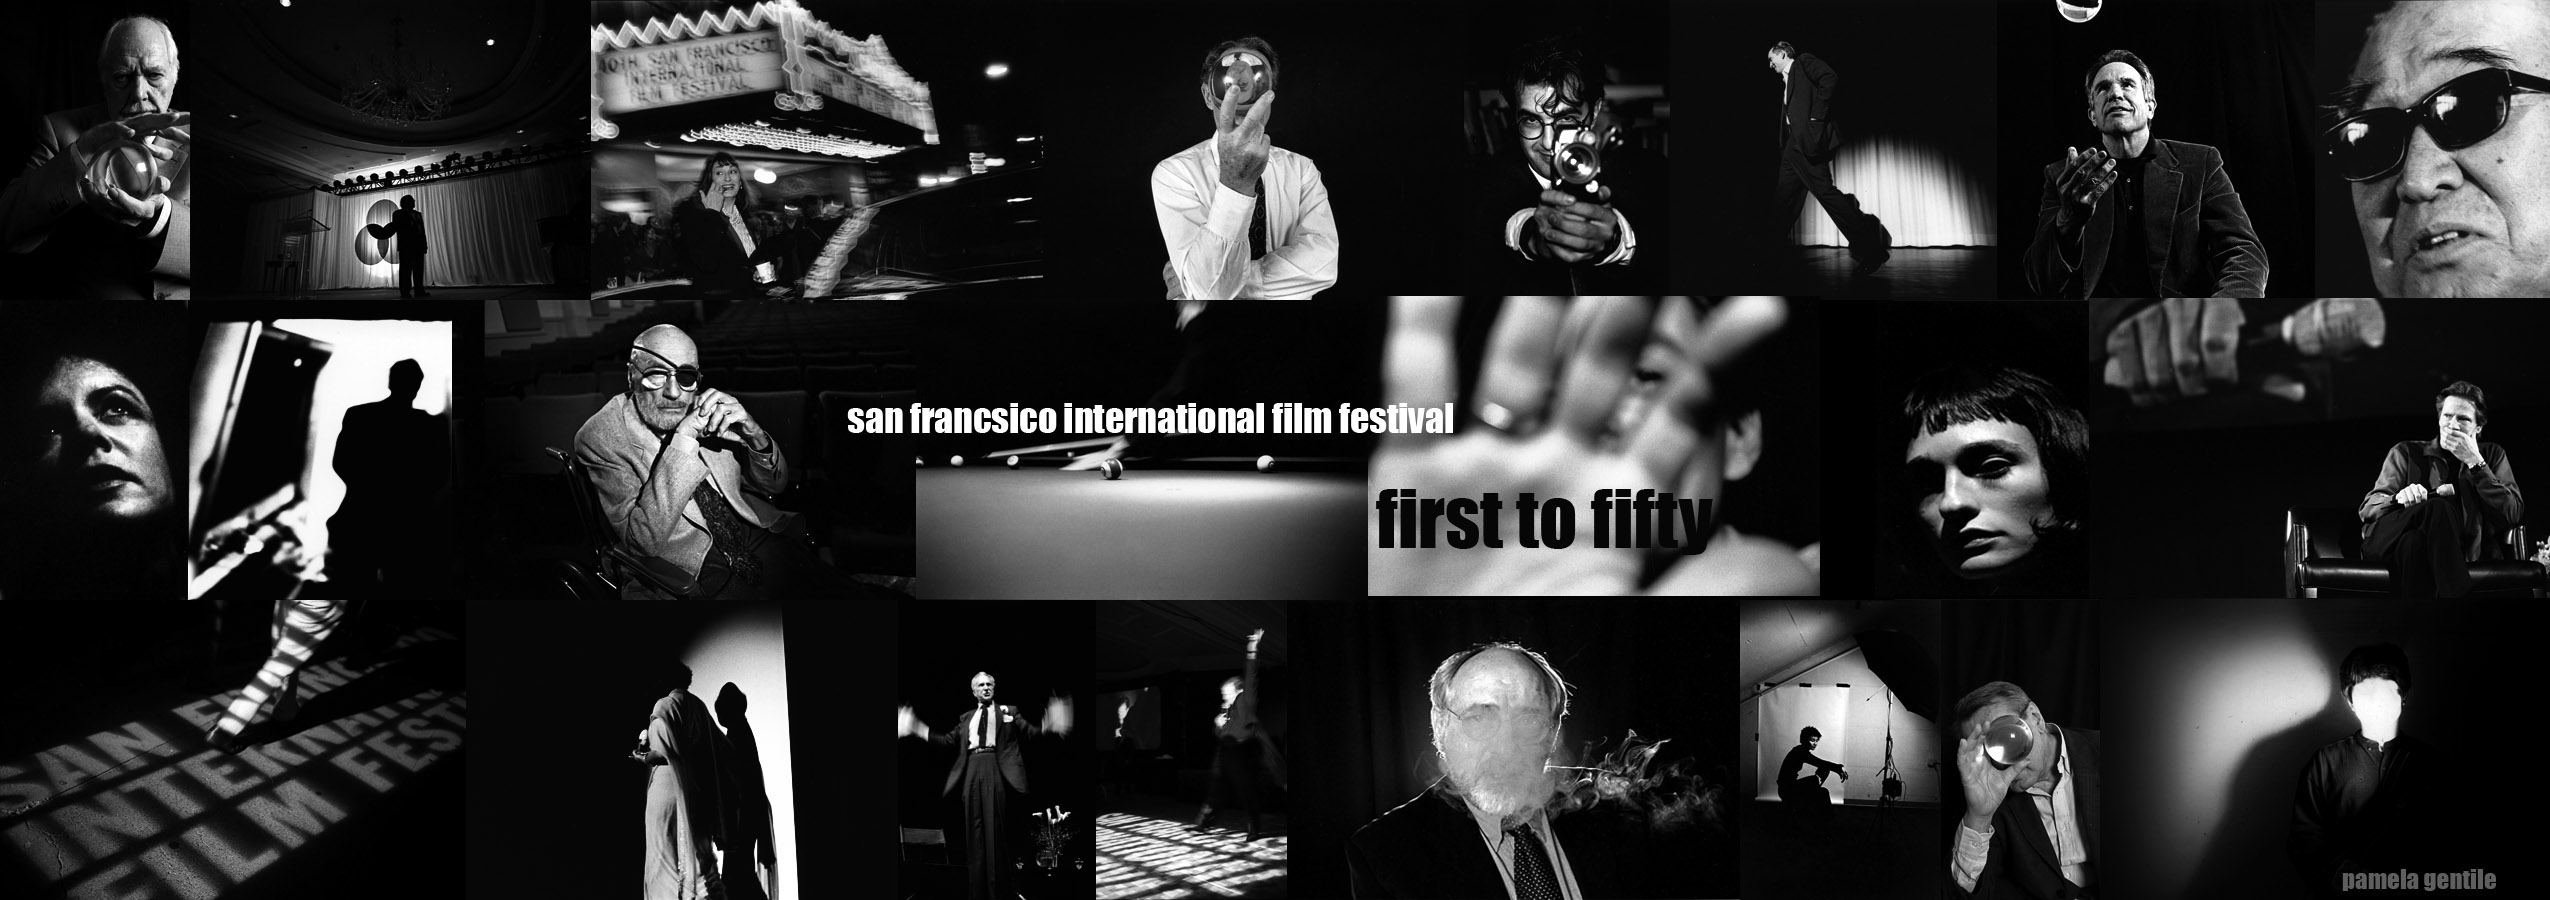 first in a series of promos for SFIFF's first to fifty campaign 